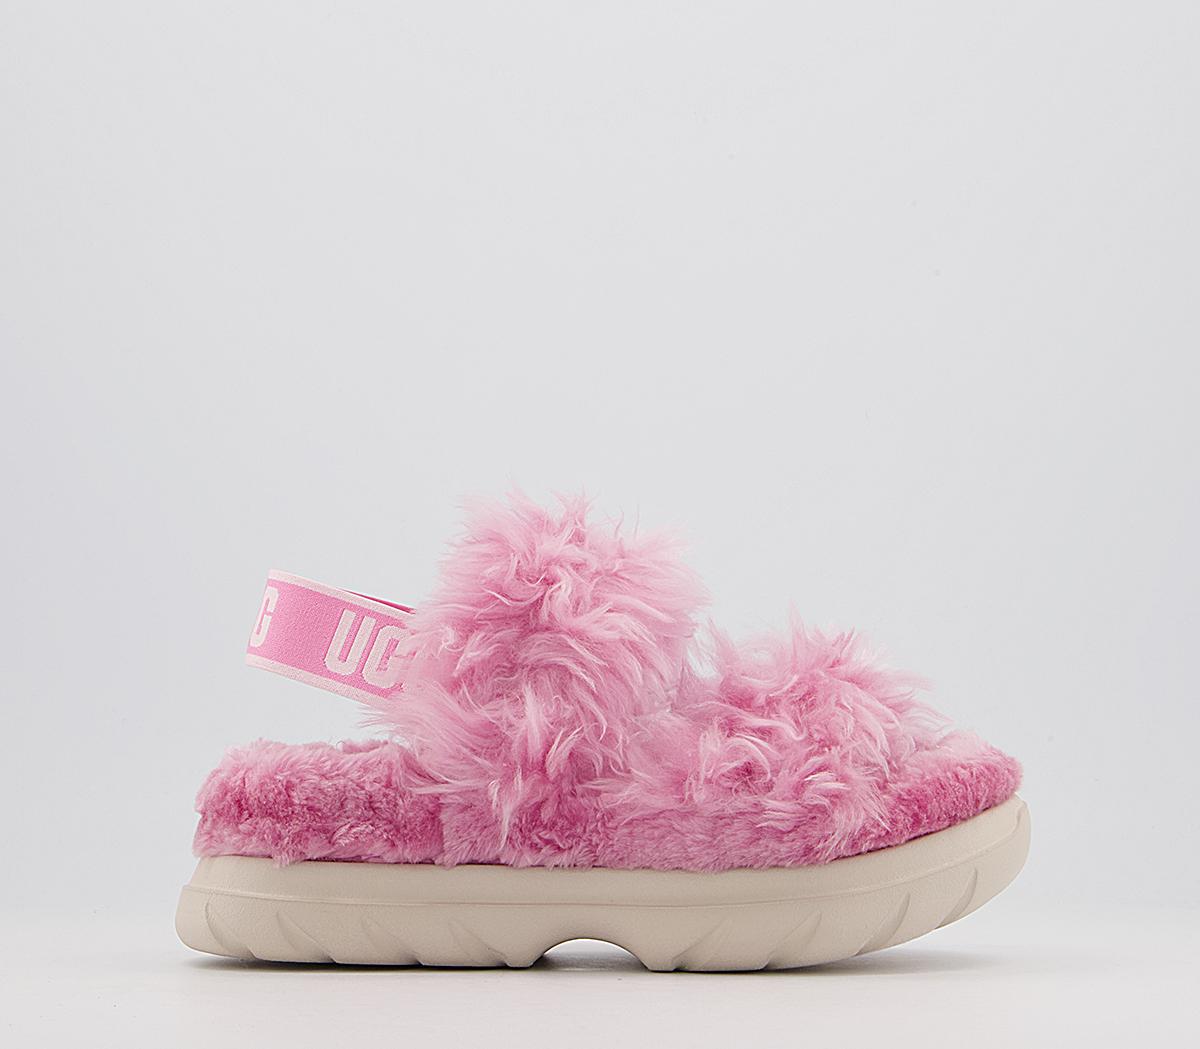 UGGFluff Sugar Sustainable SandalsPink